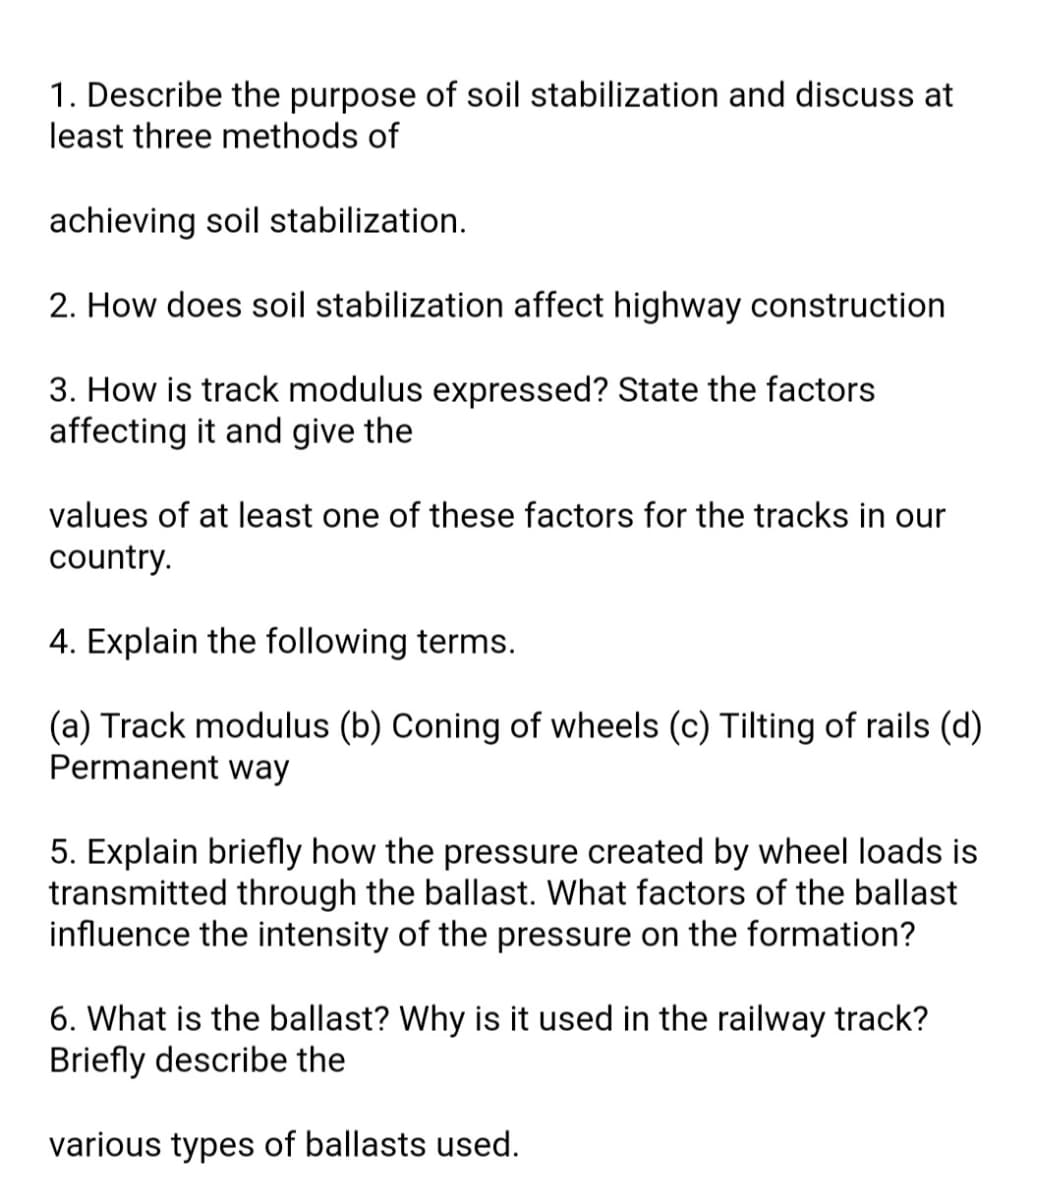 1. Describe the purpose of soil stabilization and discuss at
least three methods of
achieving soil stabilization.
2. How does soil stabilization affect highway construction
3. How is track modulus expressed? State the factors
affecting it and give the
values of at least one of these factors for the tracks in our
country.
4. Explain the following terms.
(a) Track modulus (b) Coning of wheels (c) Tilting of rails (d)
Permanent way
5. Explain briefly how the pressure created by wheel loads is
transmitted through the ballast. What factors of the ballast
influence the intensity of the pressure on the formation?
6. What is the ballast? Why is it used in the railway track?
Briefly describe the
various types of ballasts used.
